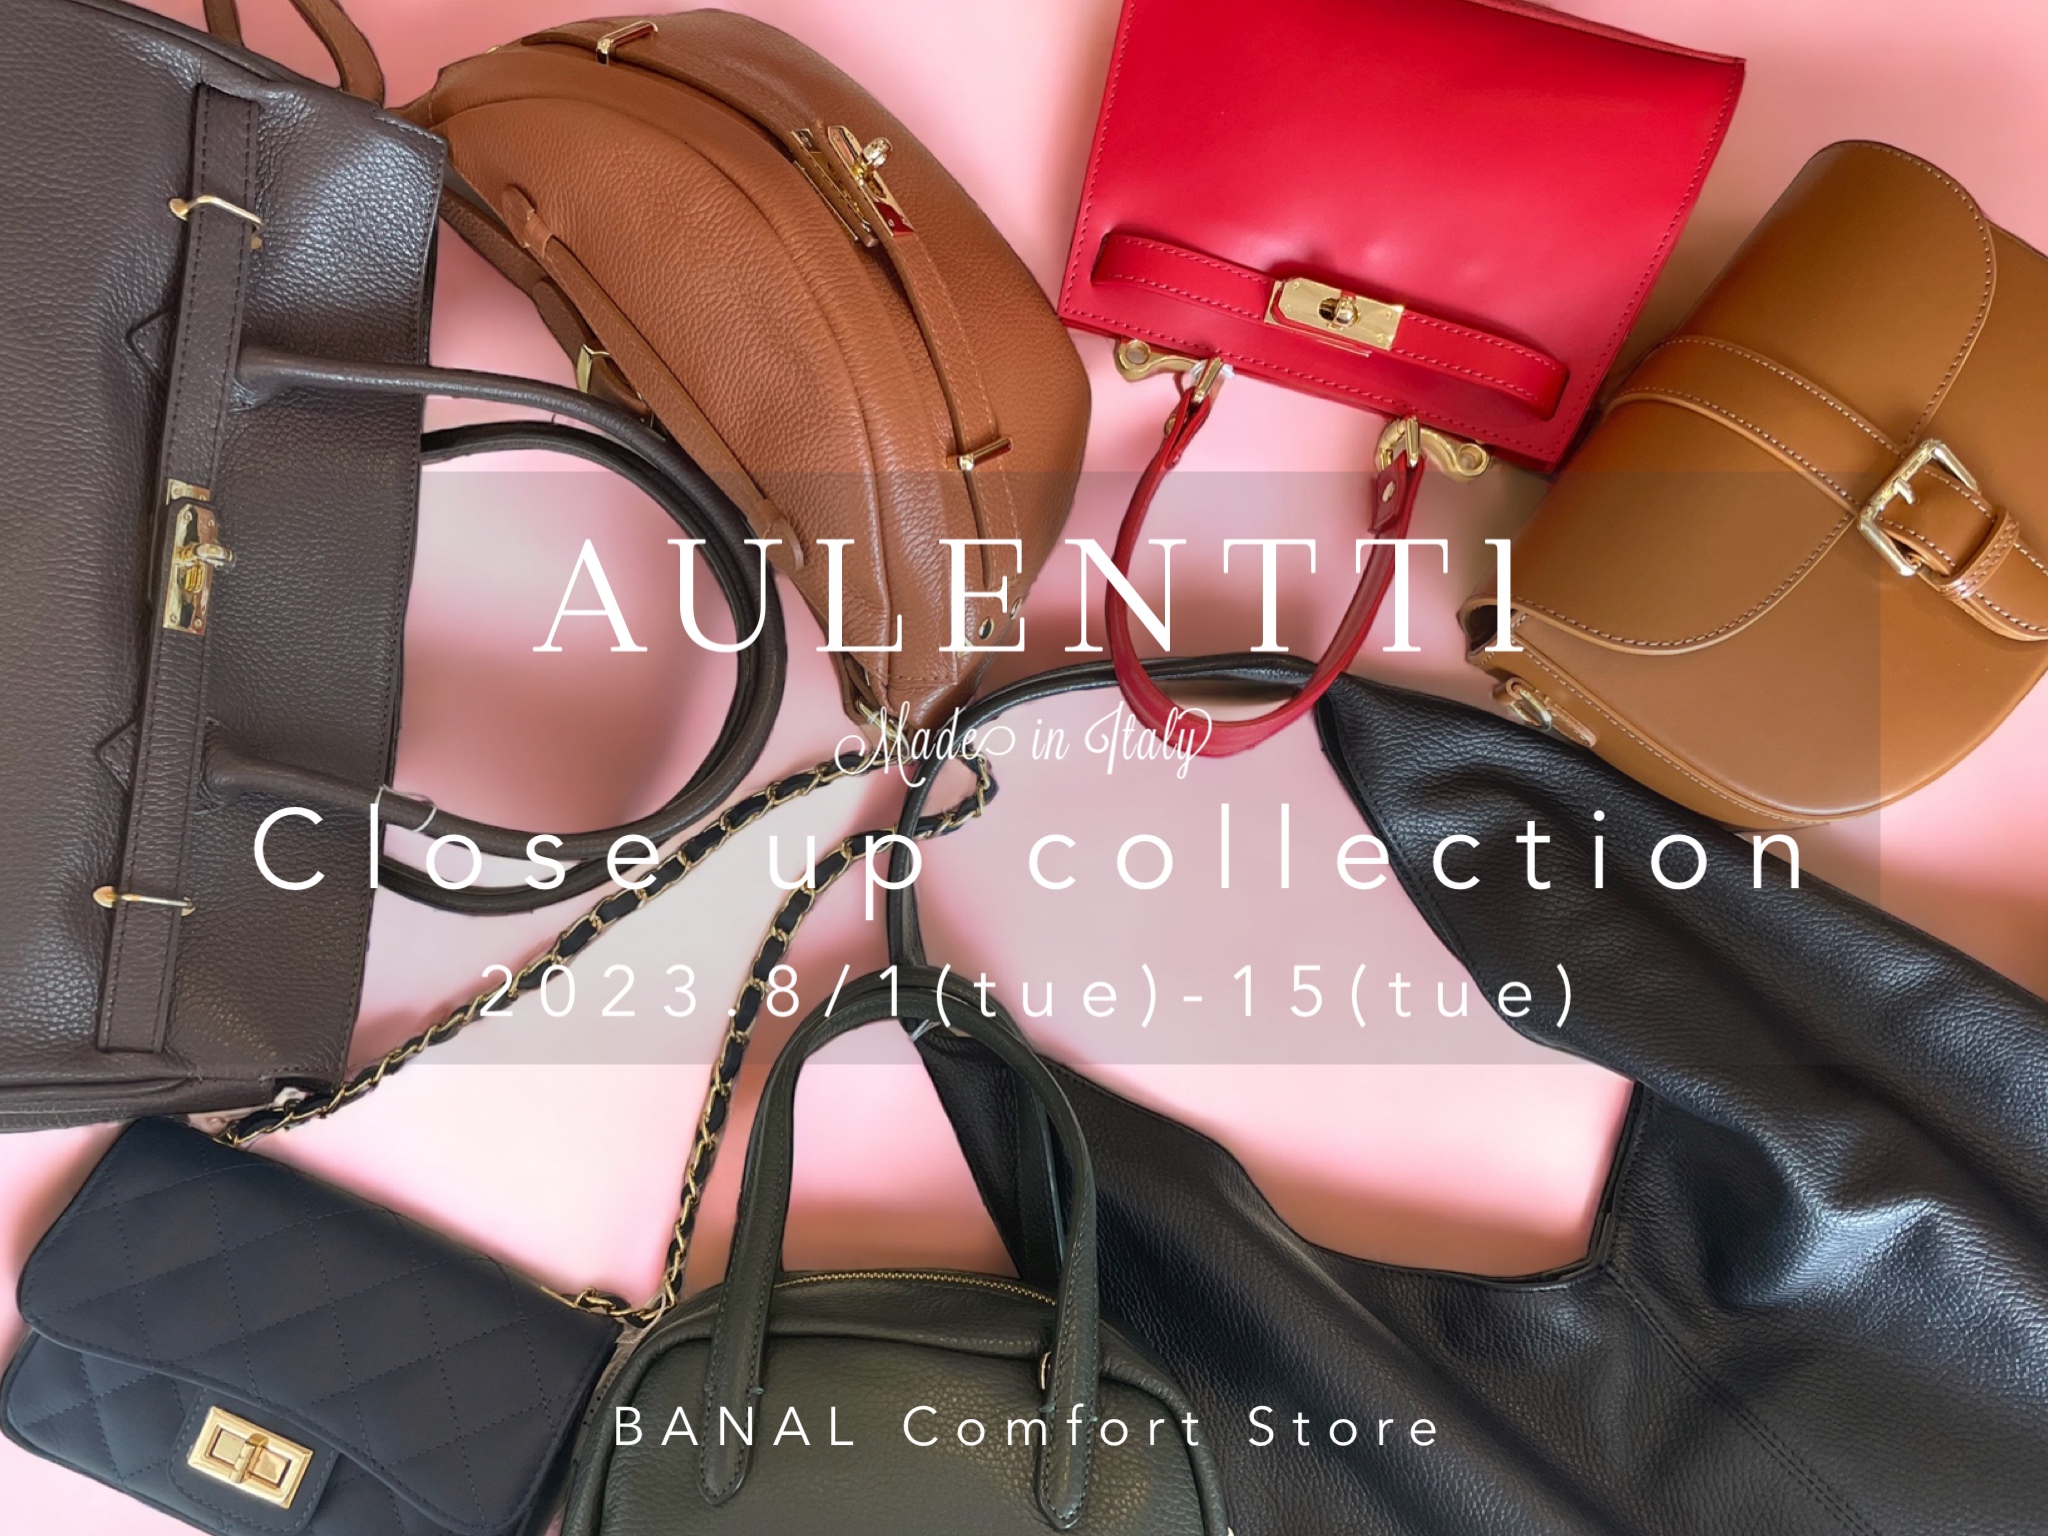 AULENTTI Close up collection